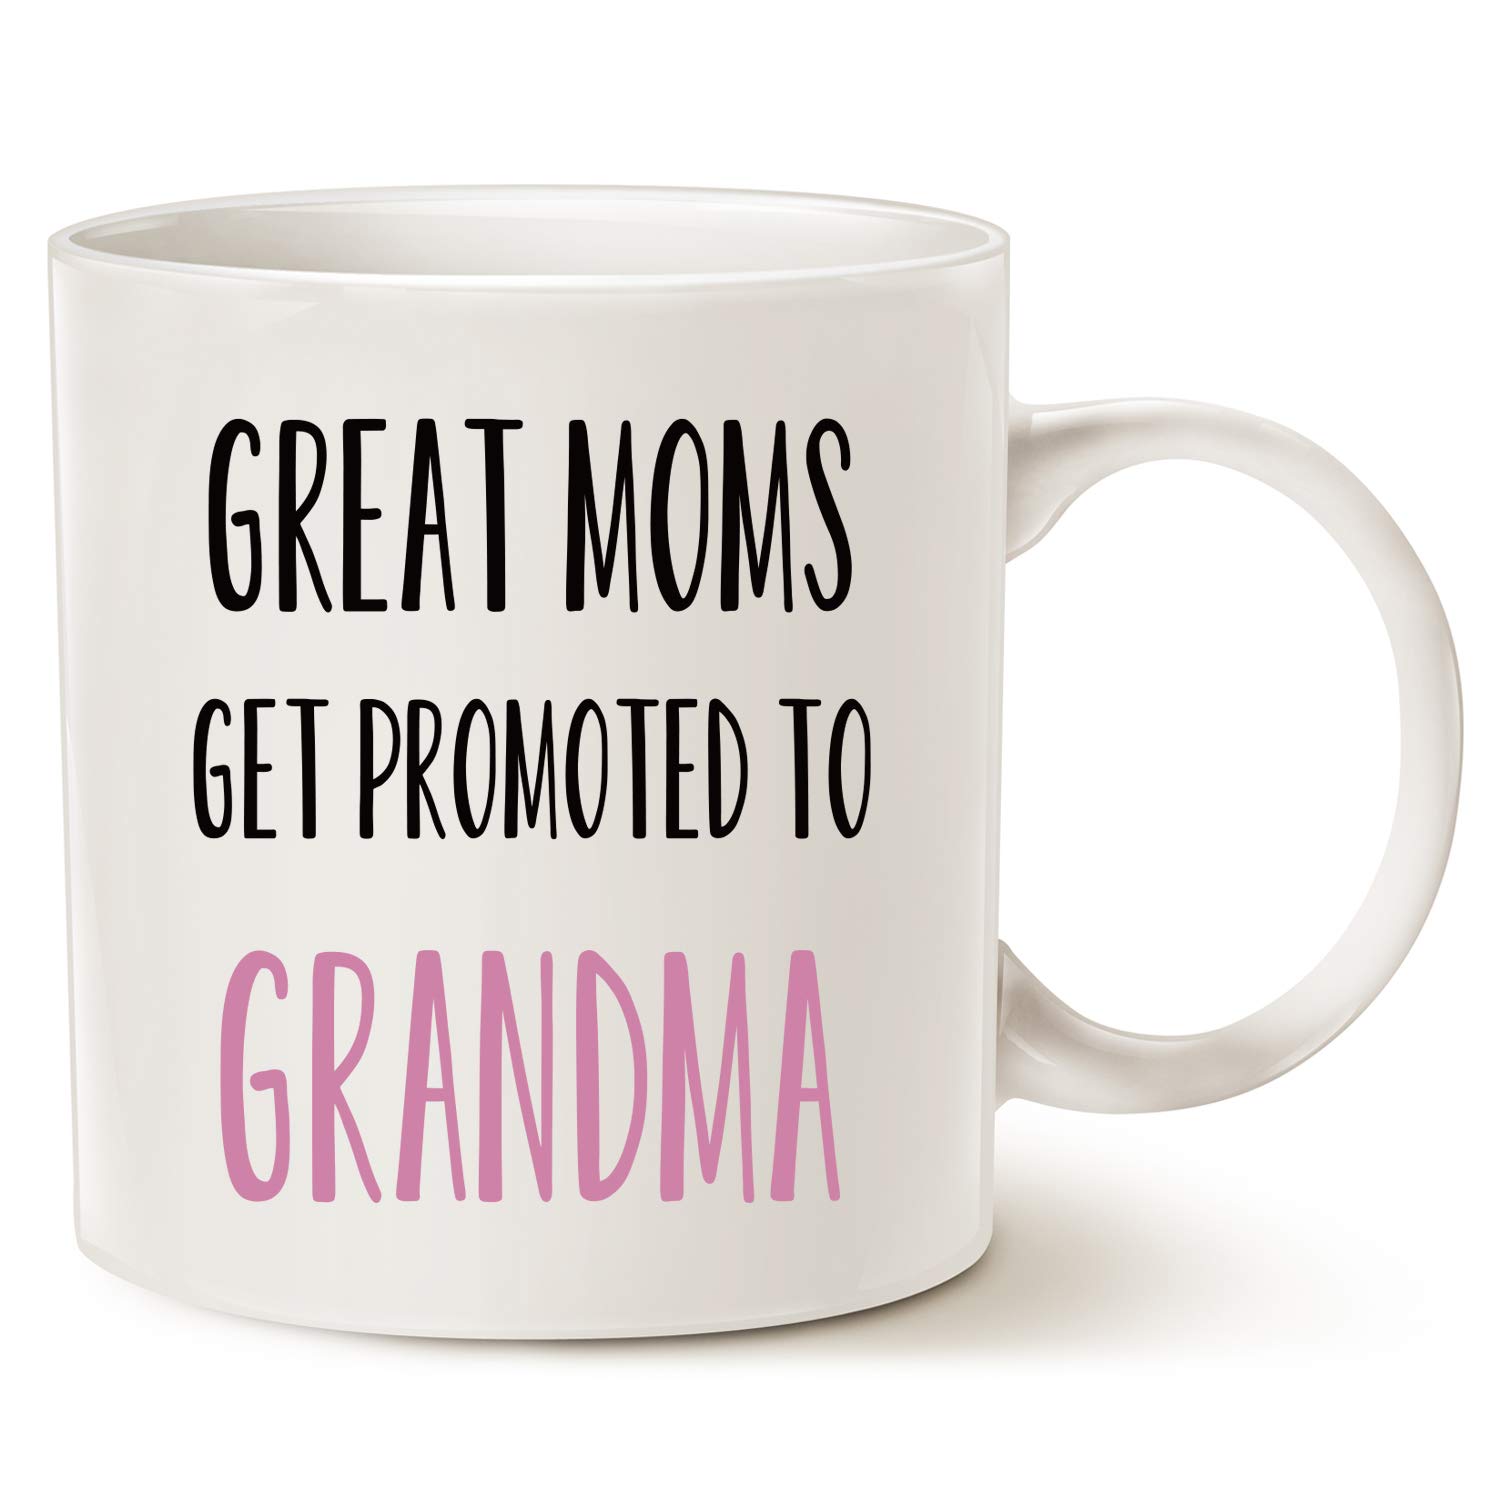 Coffee mug reading in all caps, black text: GREAT MOMS GET PROMOTED and then in pink text: To GRANDMA